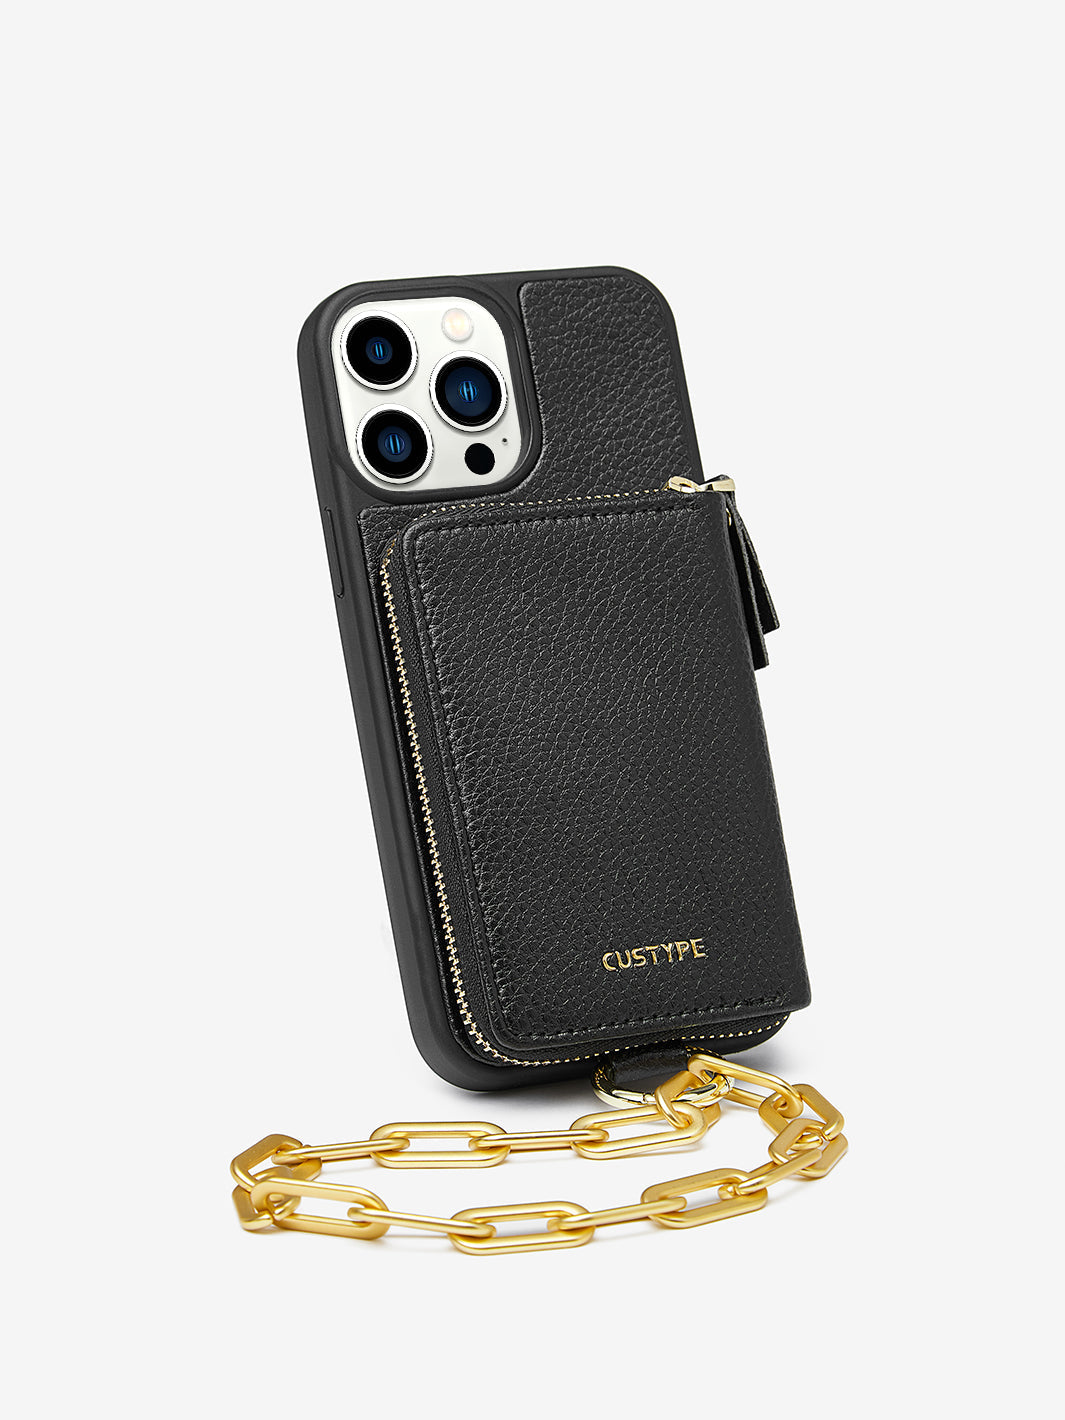 Custype Wallet iPhone Case with Wristband in Black